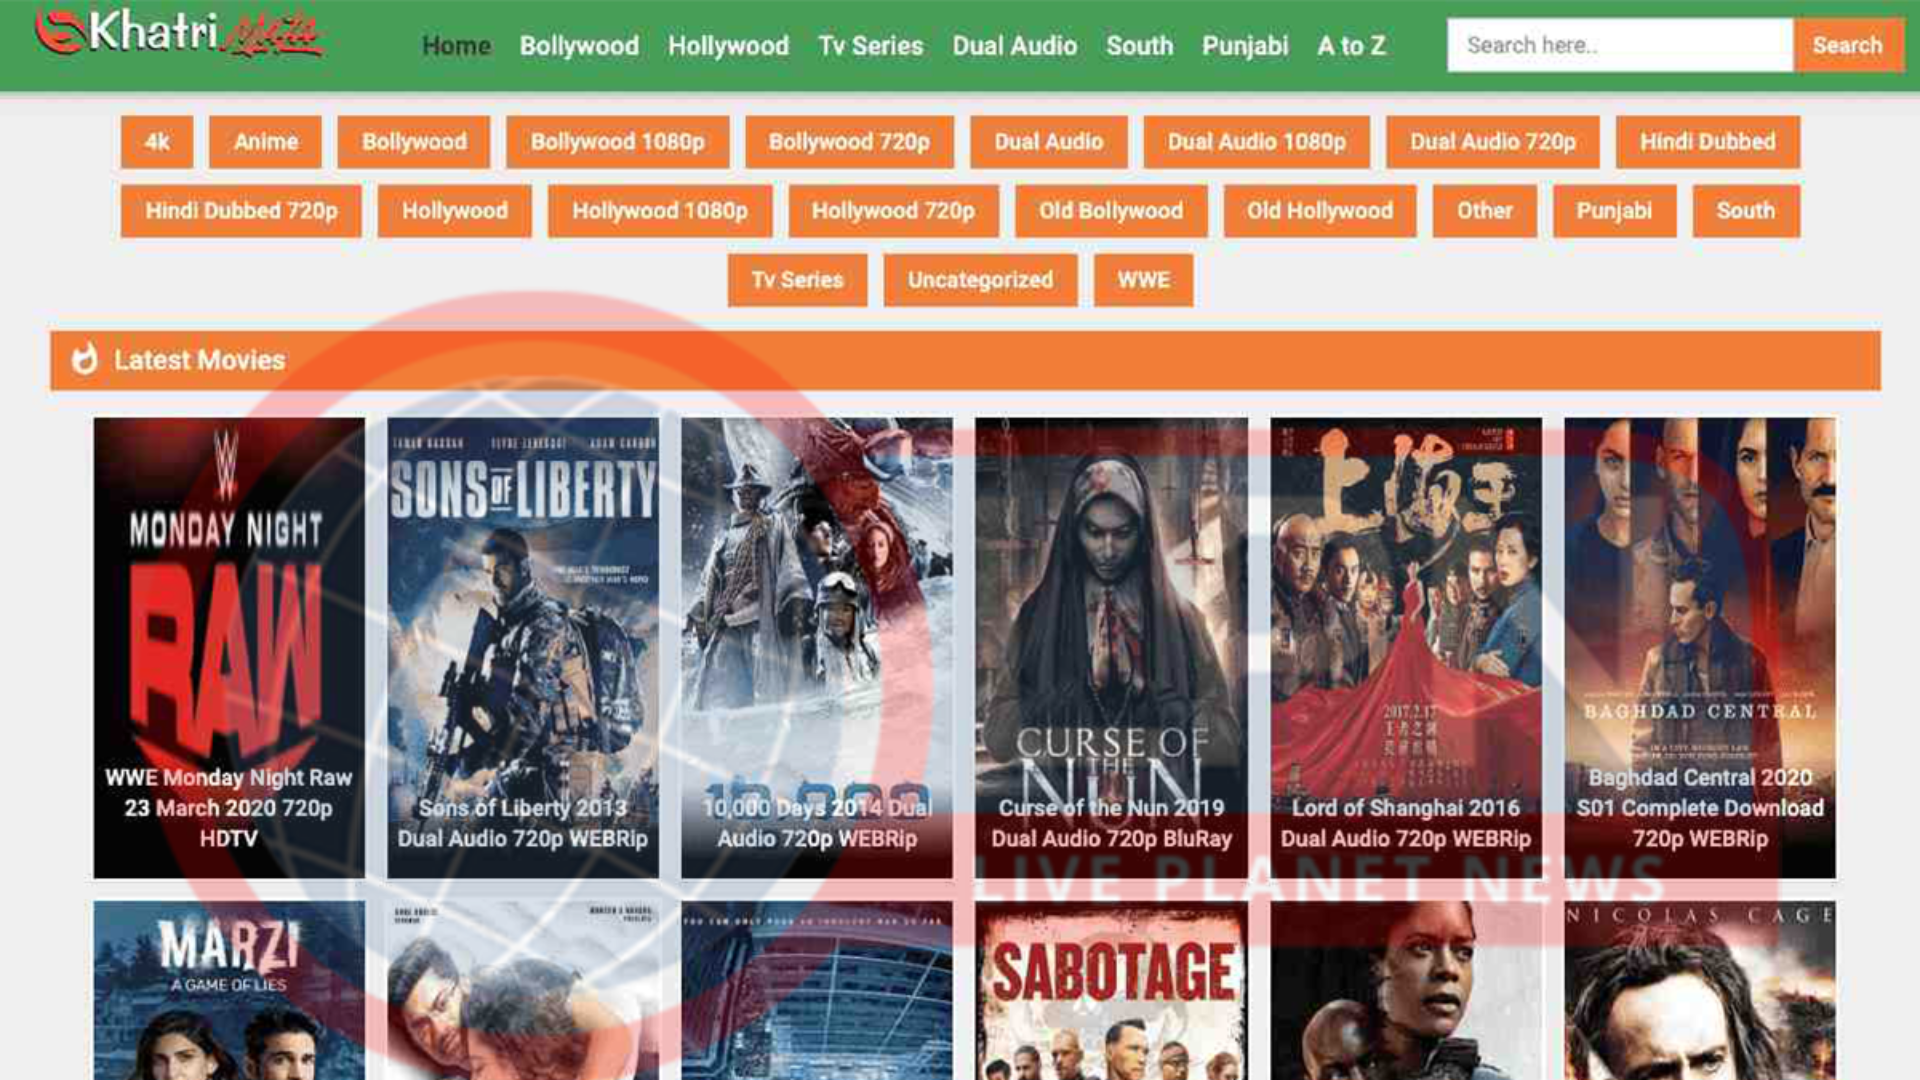 Khatrimaza webpage showing different movie covers with search button on the upper right corner